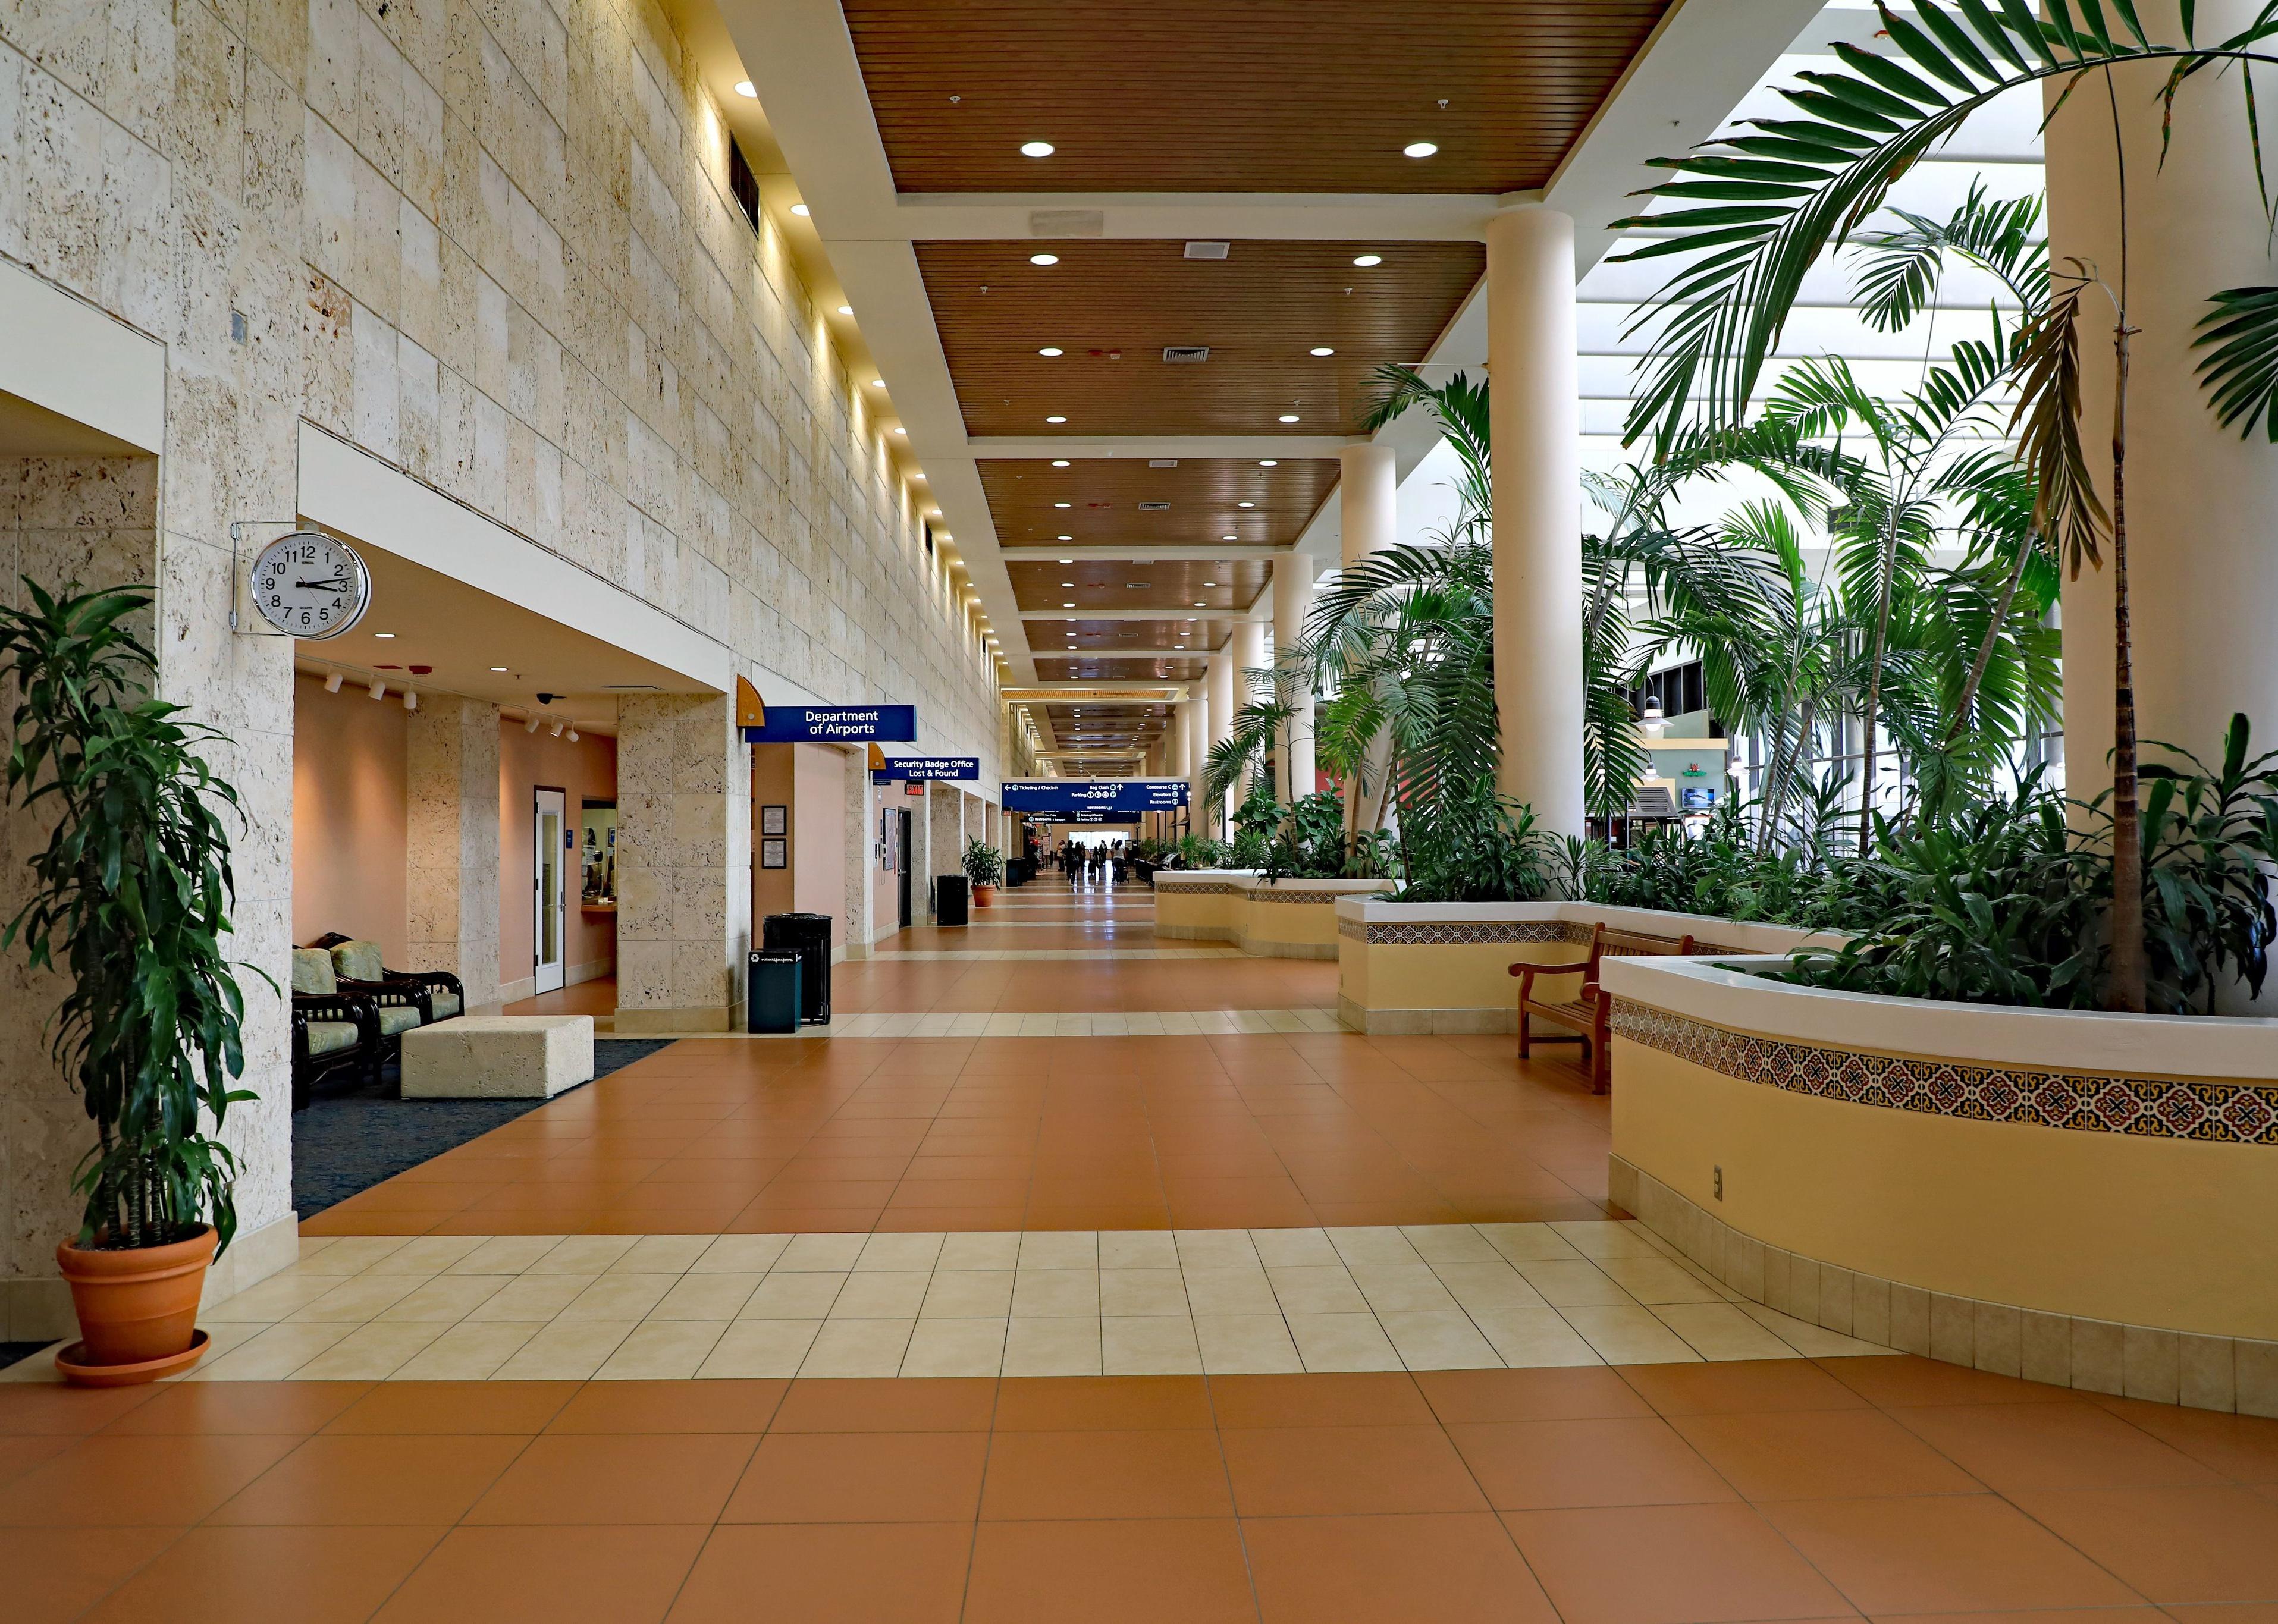 The beautiful interior of the Palm Beach airport with a stone hallway lined in palm trees.